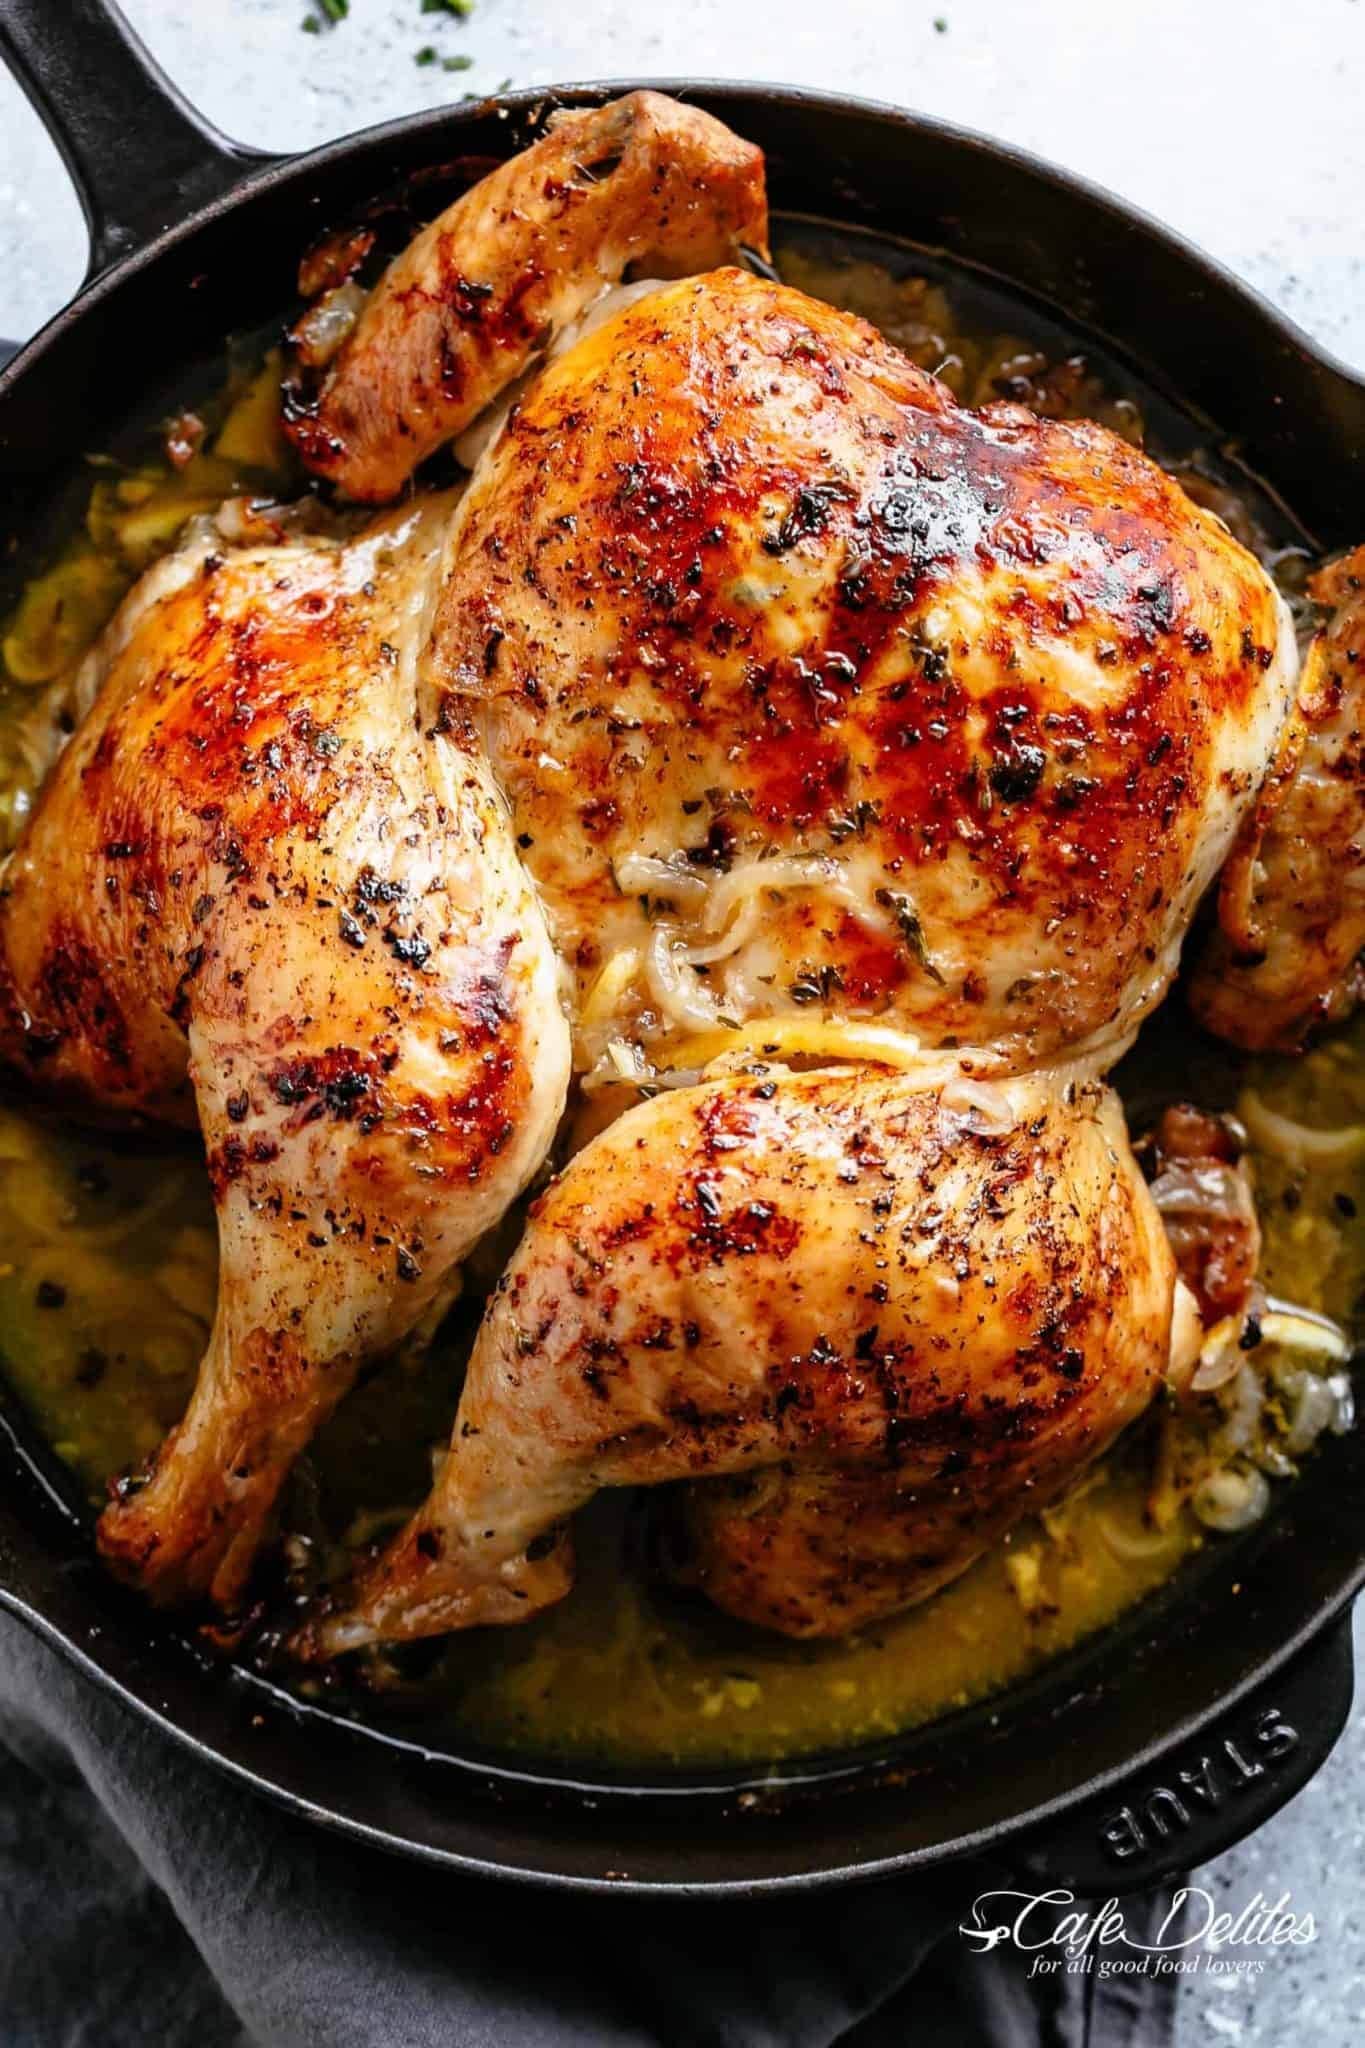 Roasted chicken in skillet with lemon sauce.